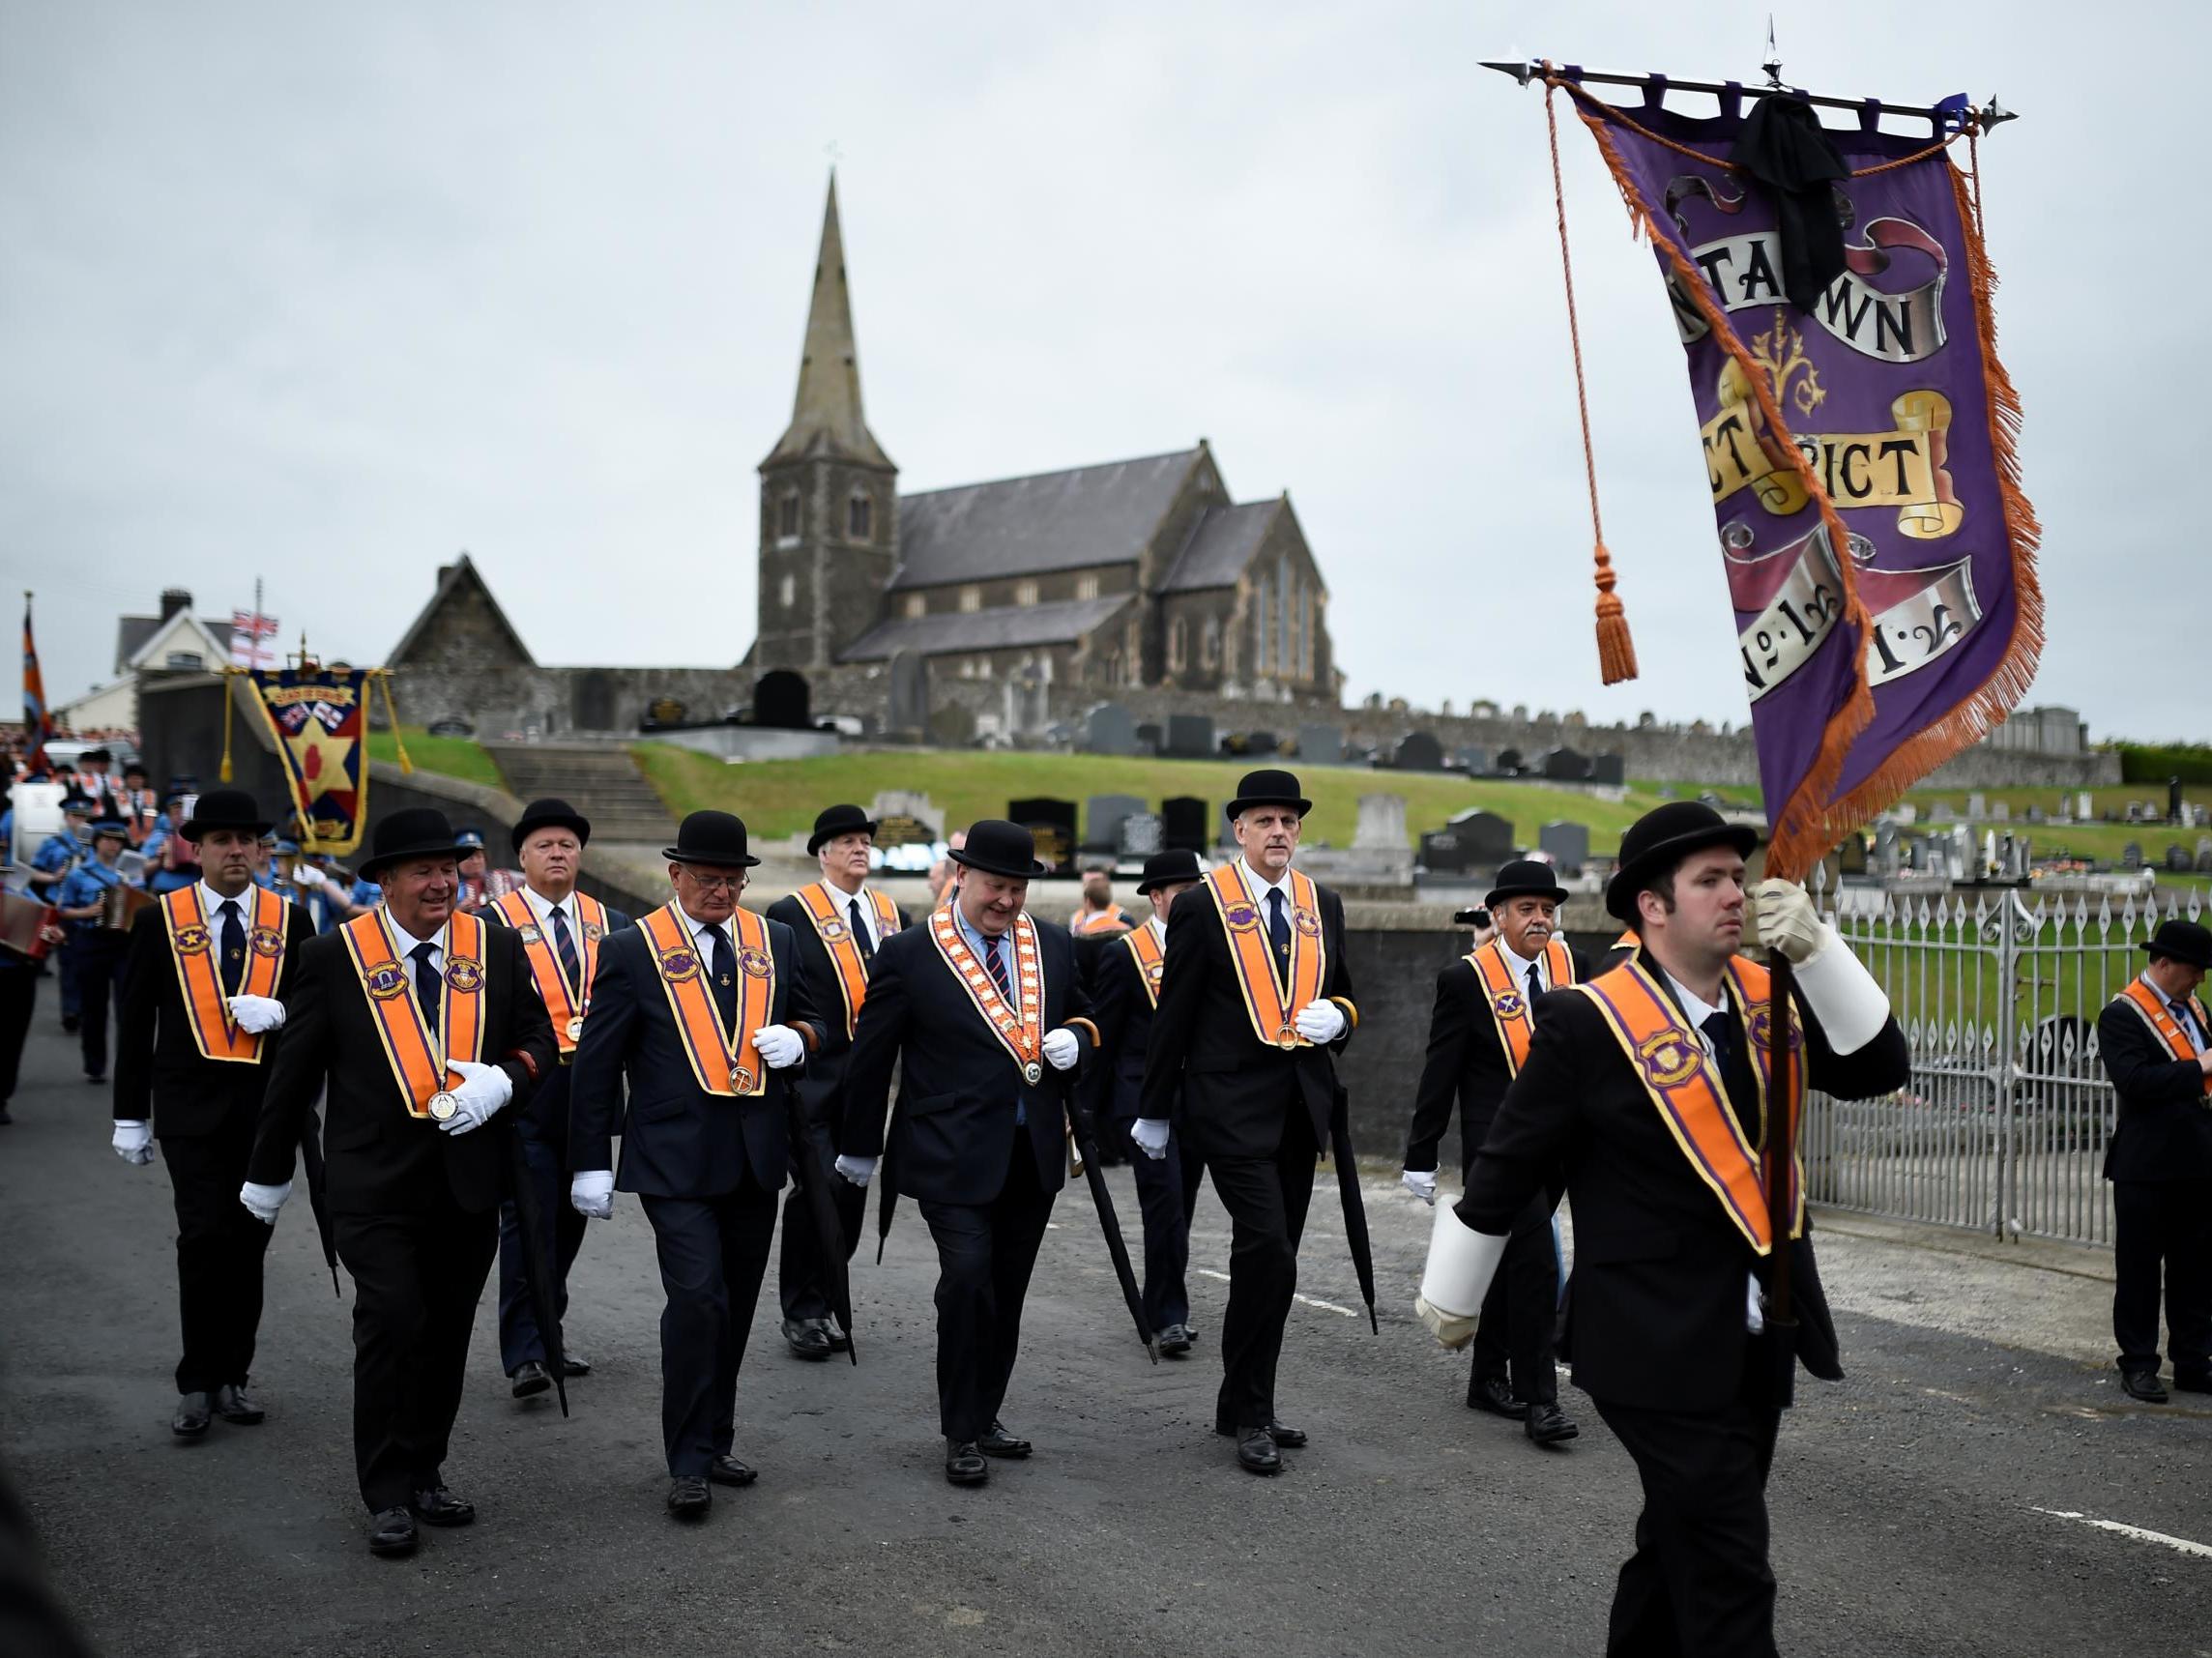 Drumcree March: Why is the Orange Order parade so divisive and what role do the DUP play?